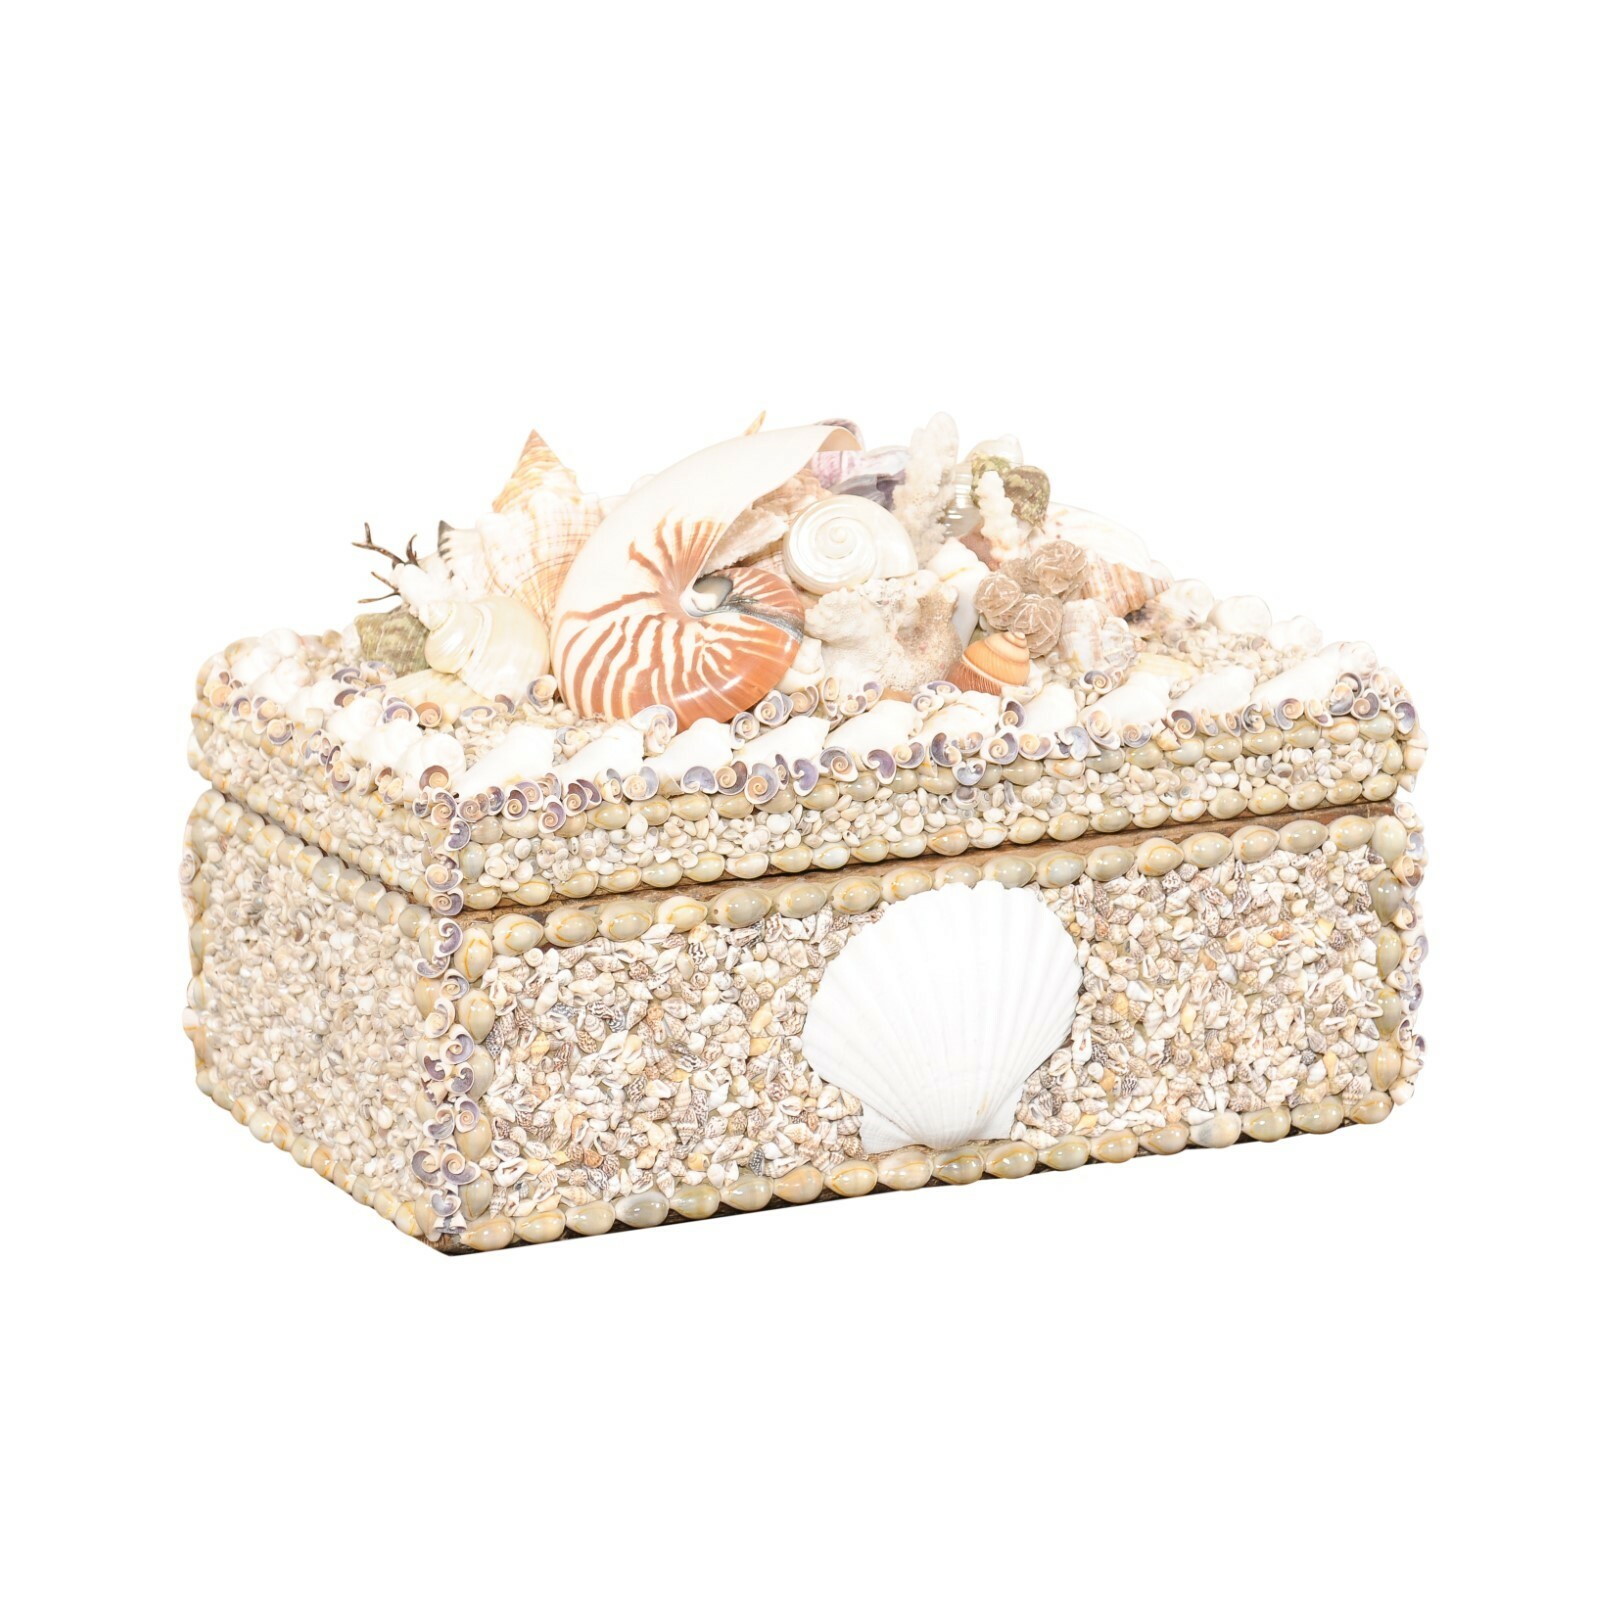 Sea Shell Box Artisan Crafted One-of-a-Kind